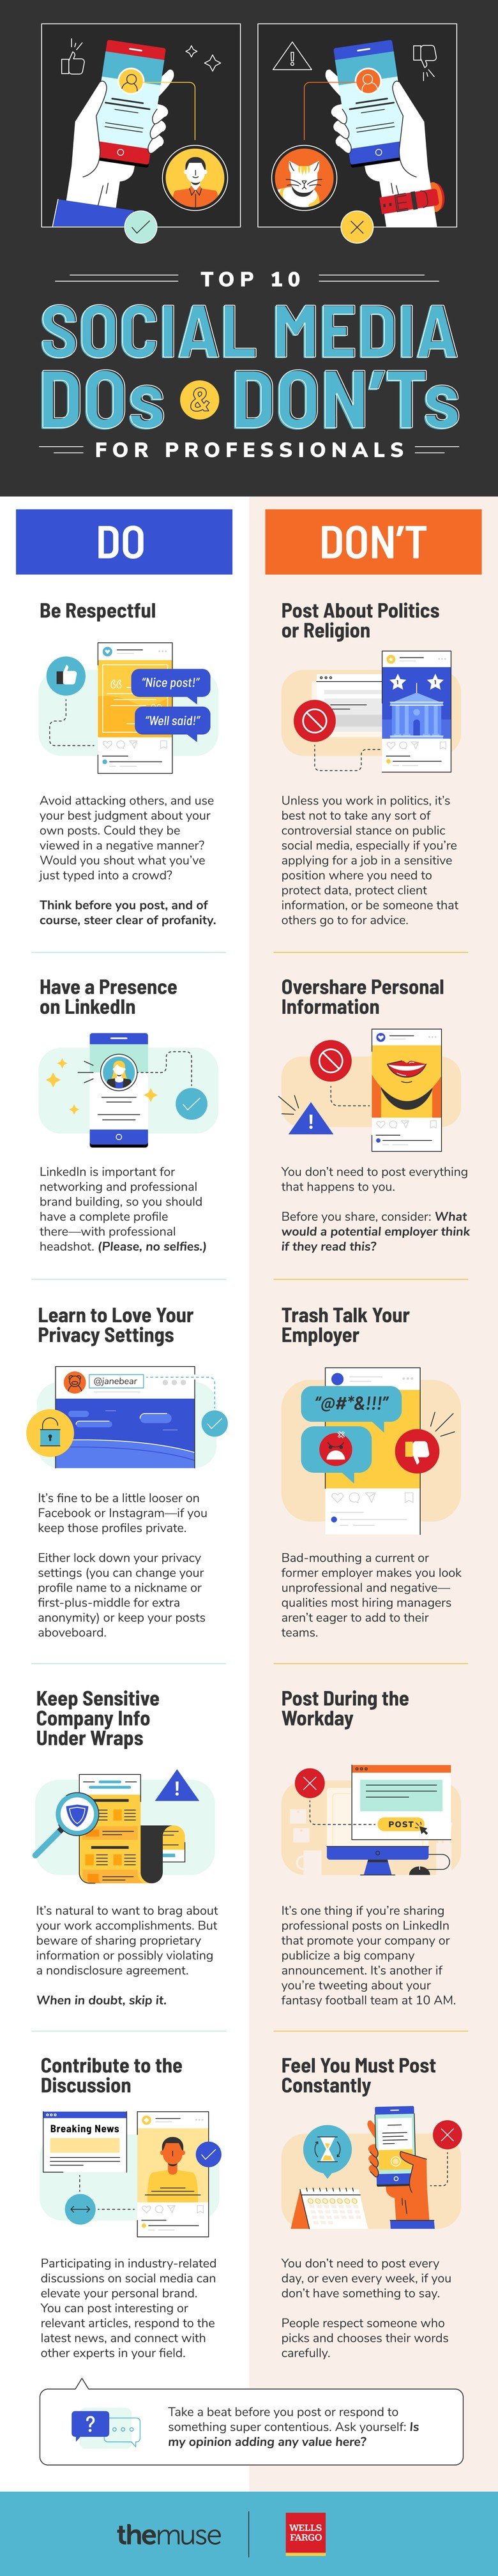 infographic illustrating top 10 social media dos and don'ts for professionals